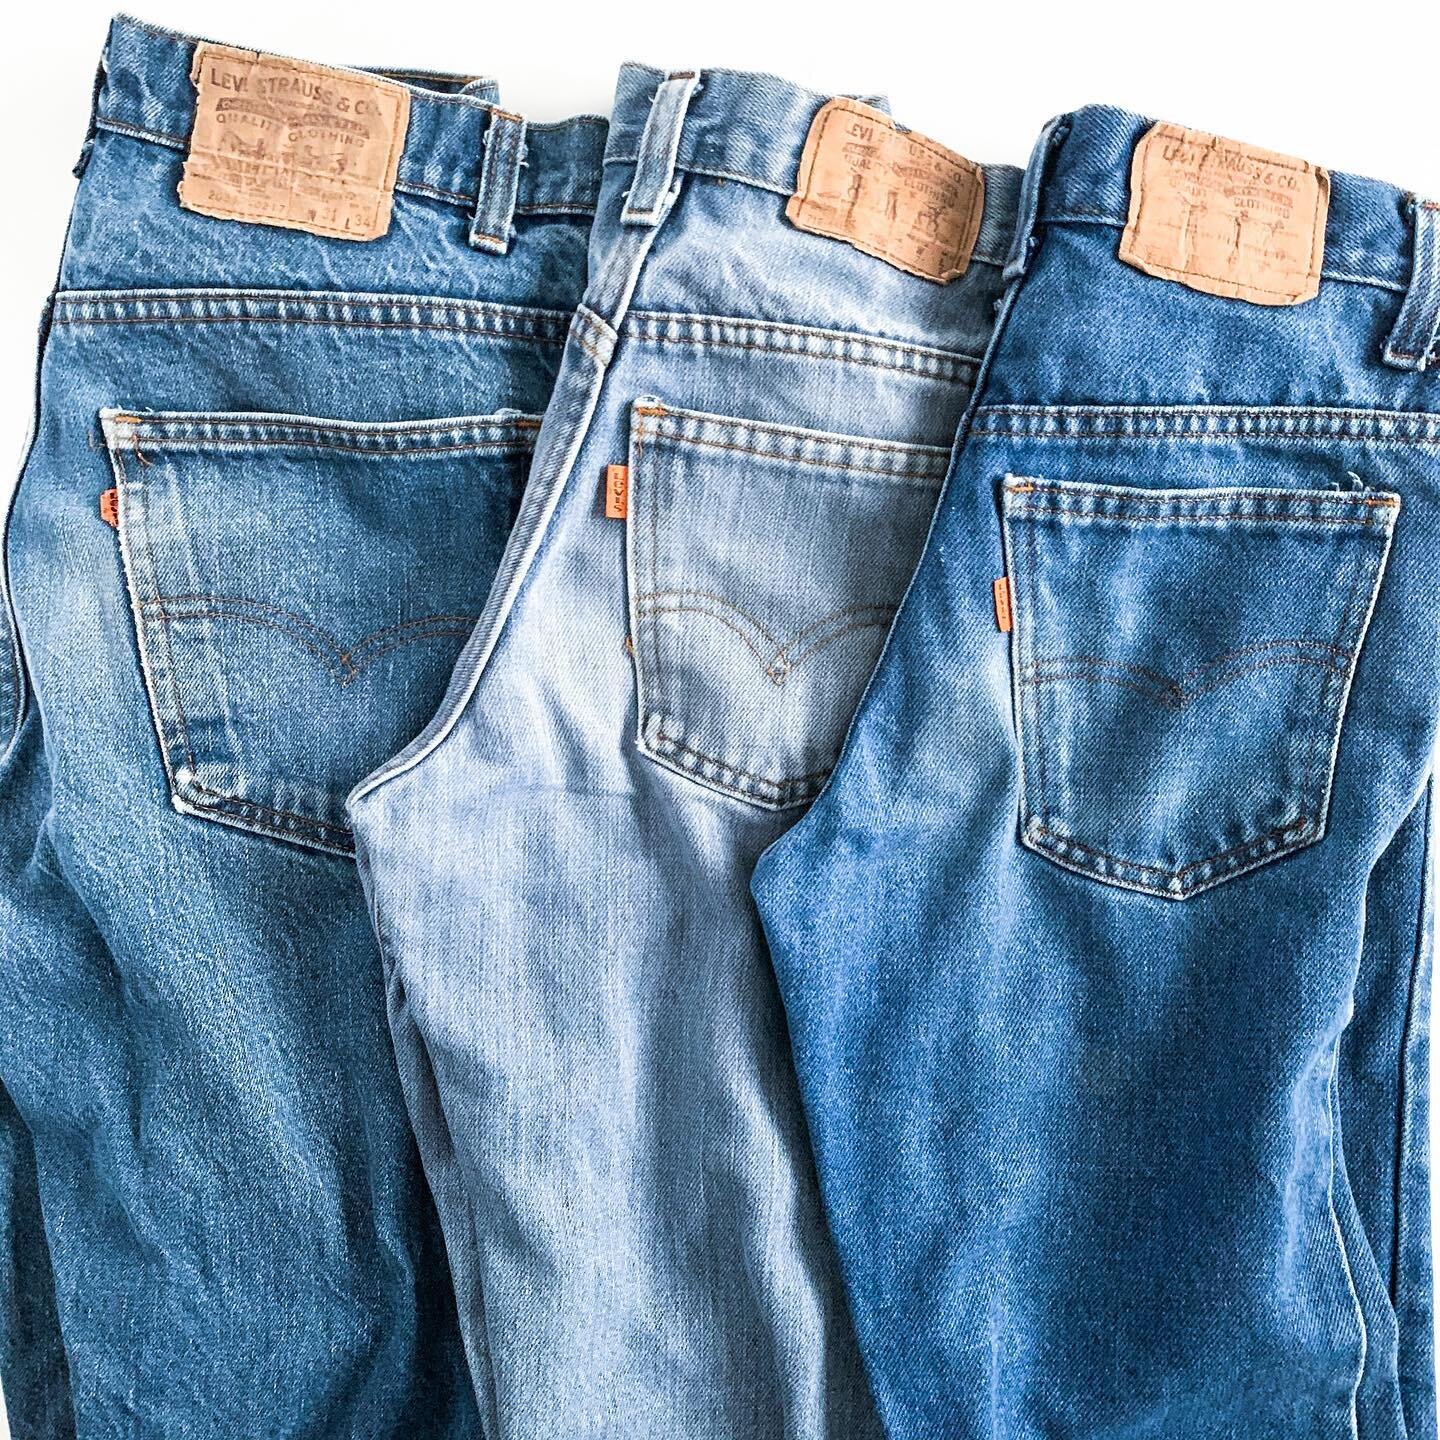 Found not ☝🏻. Not ✌🏻. But 🤟🏻 pairs of vintage, orange tab Levi&rsquo;s at Goodwill this weekend! 

More of the weekend&rsquo;s finds in stories.

#vintagelevis #orangetablevis #thrift #thrifted #thriftfinds #reseller